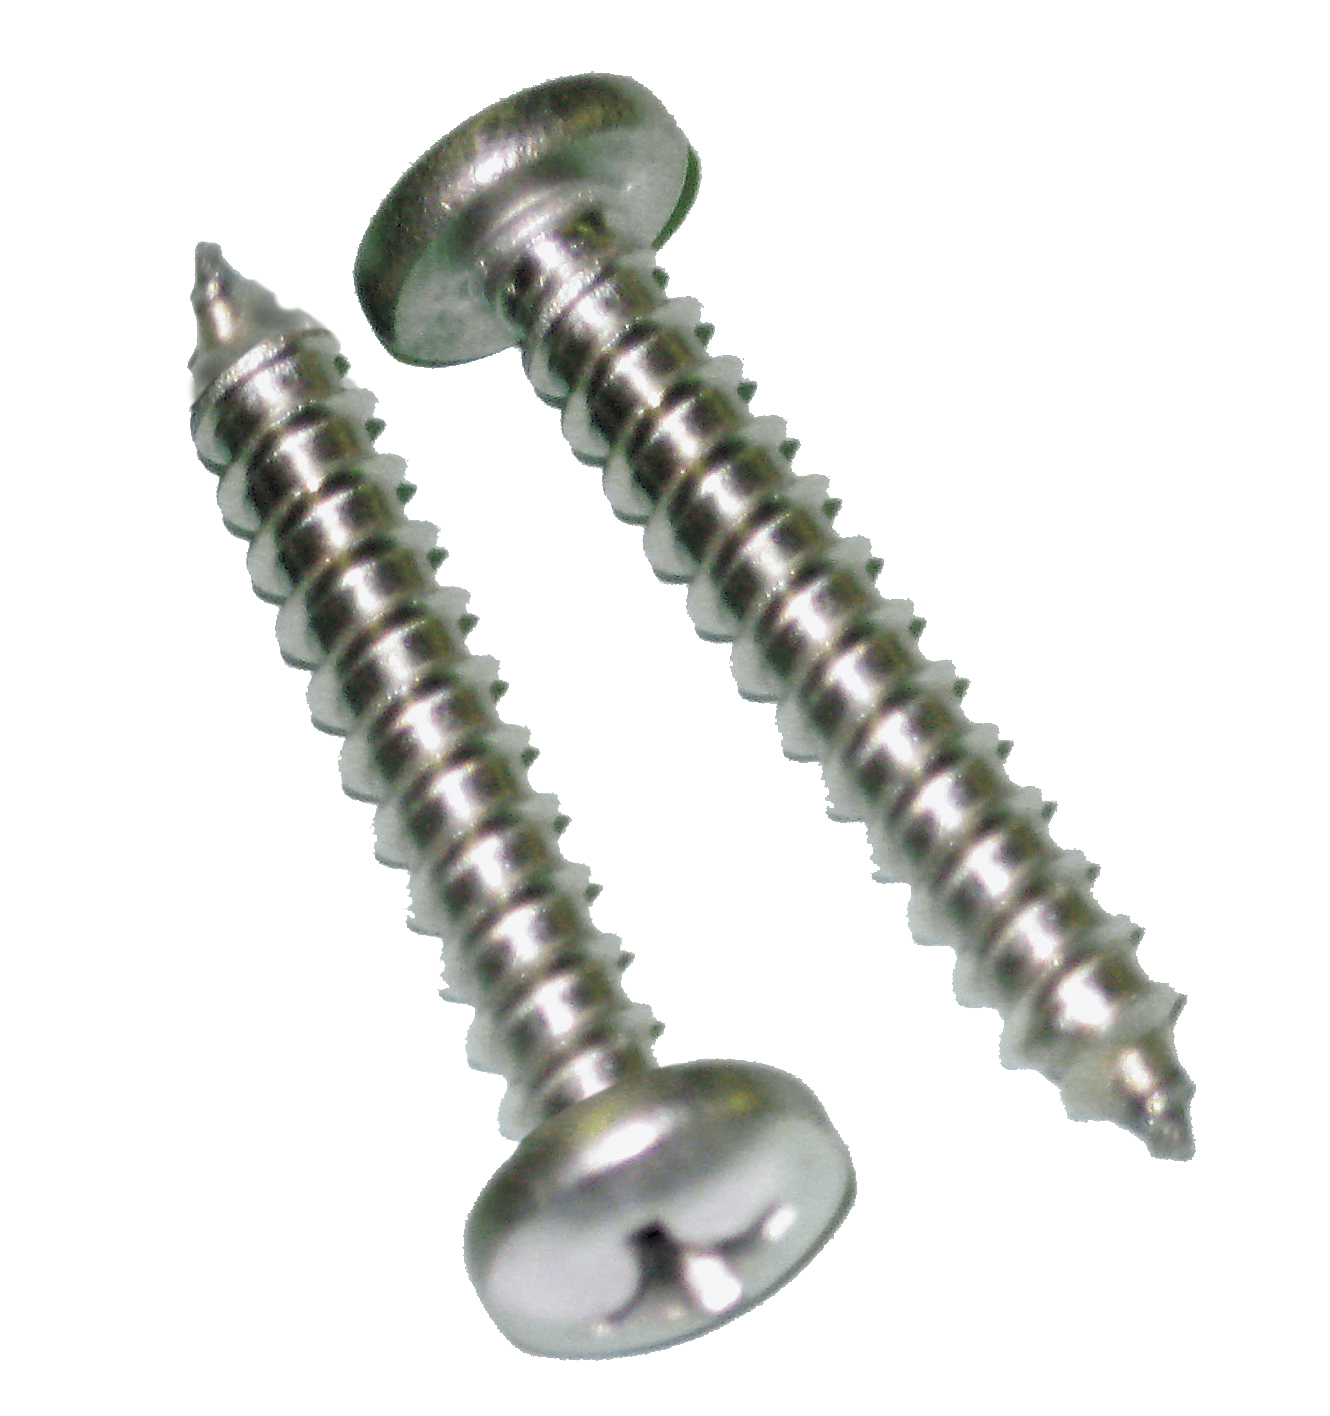 Slotted pan Head Sheet Metal Tapping Screw Stainless Steel #6X1" Qty 100